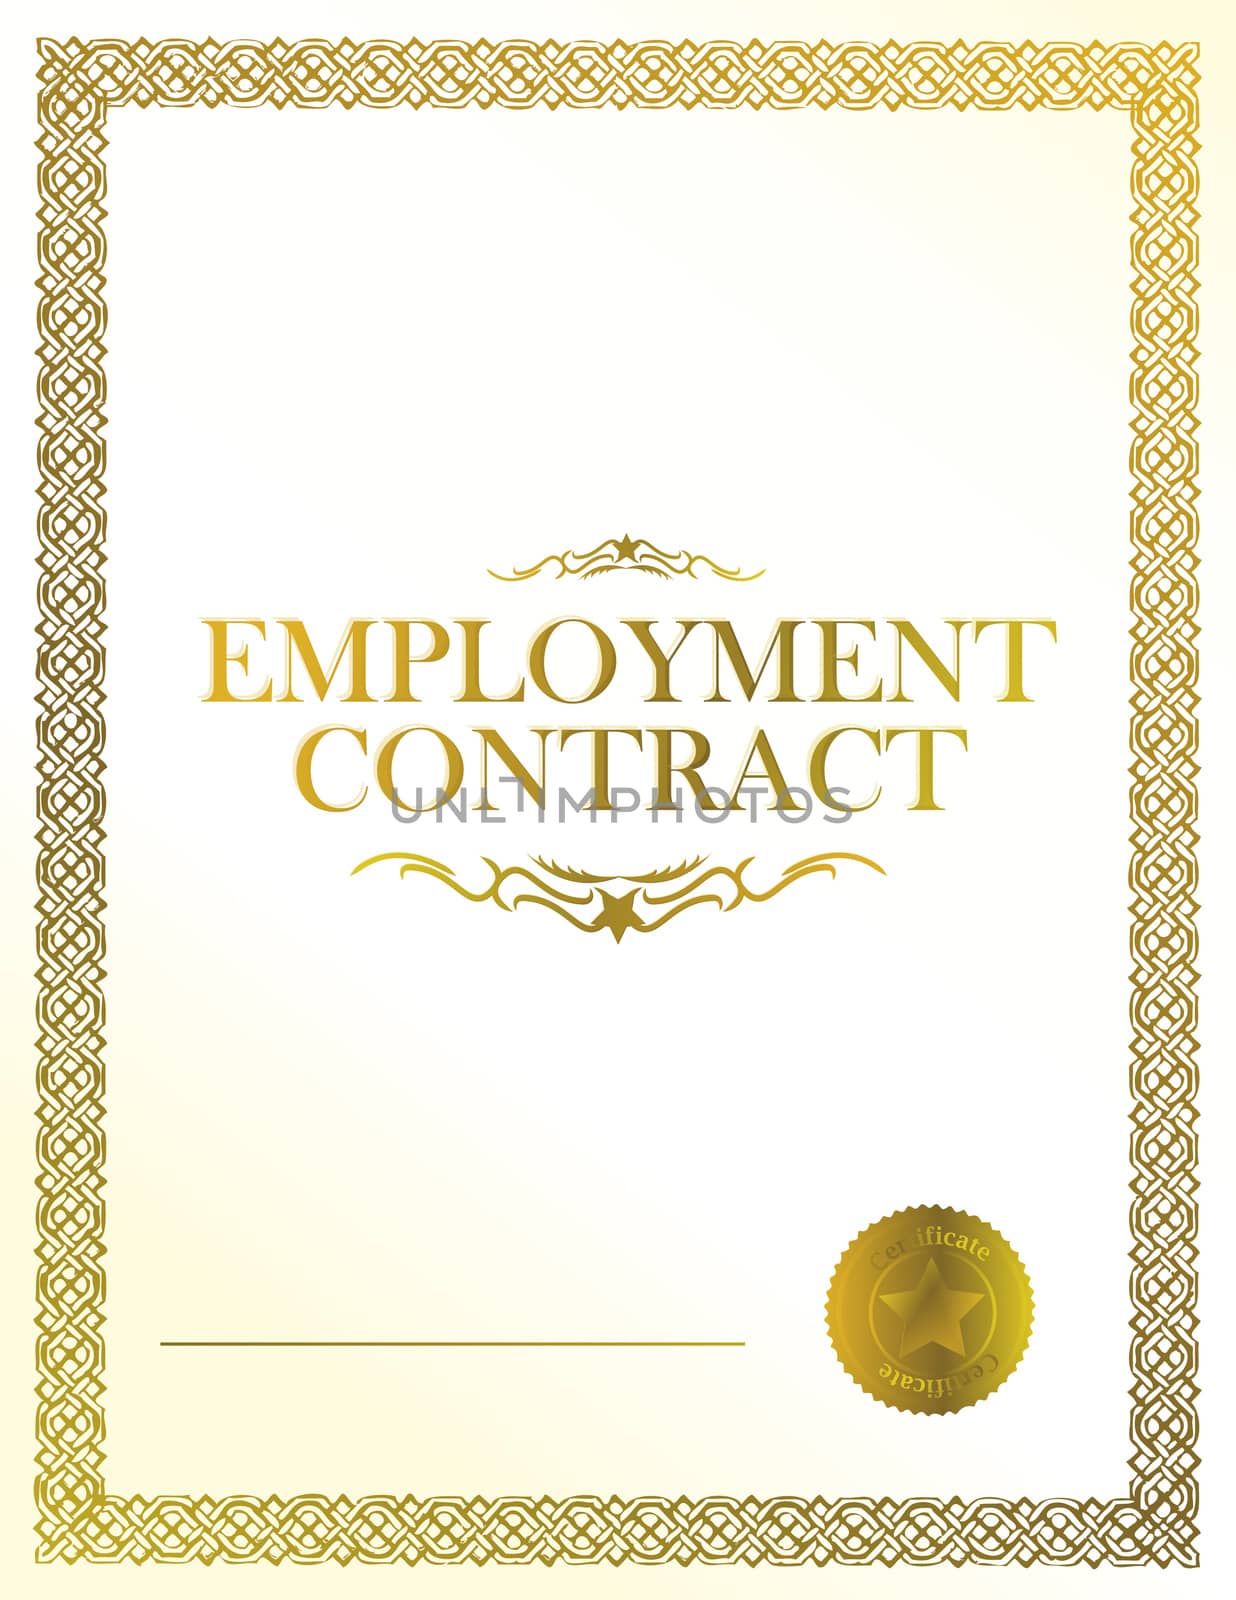 Employment Contract business concept illustration